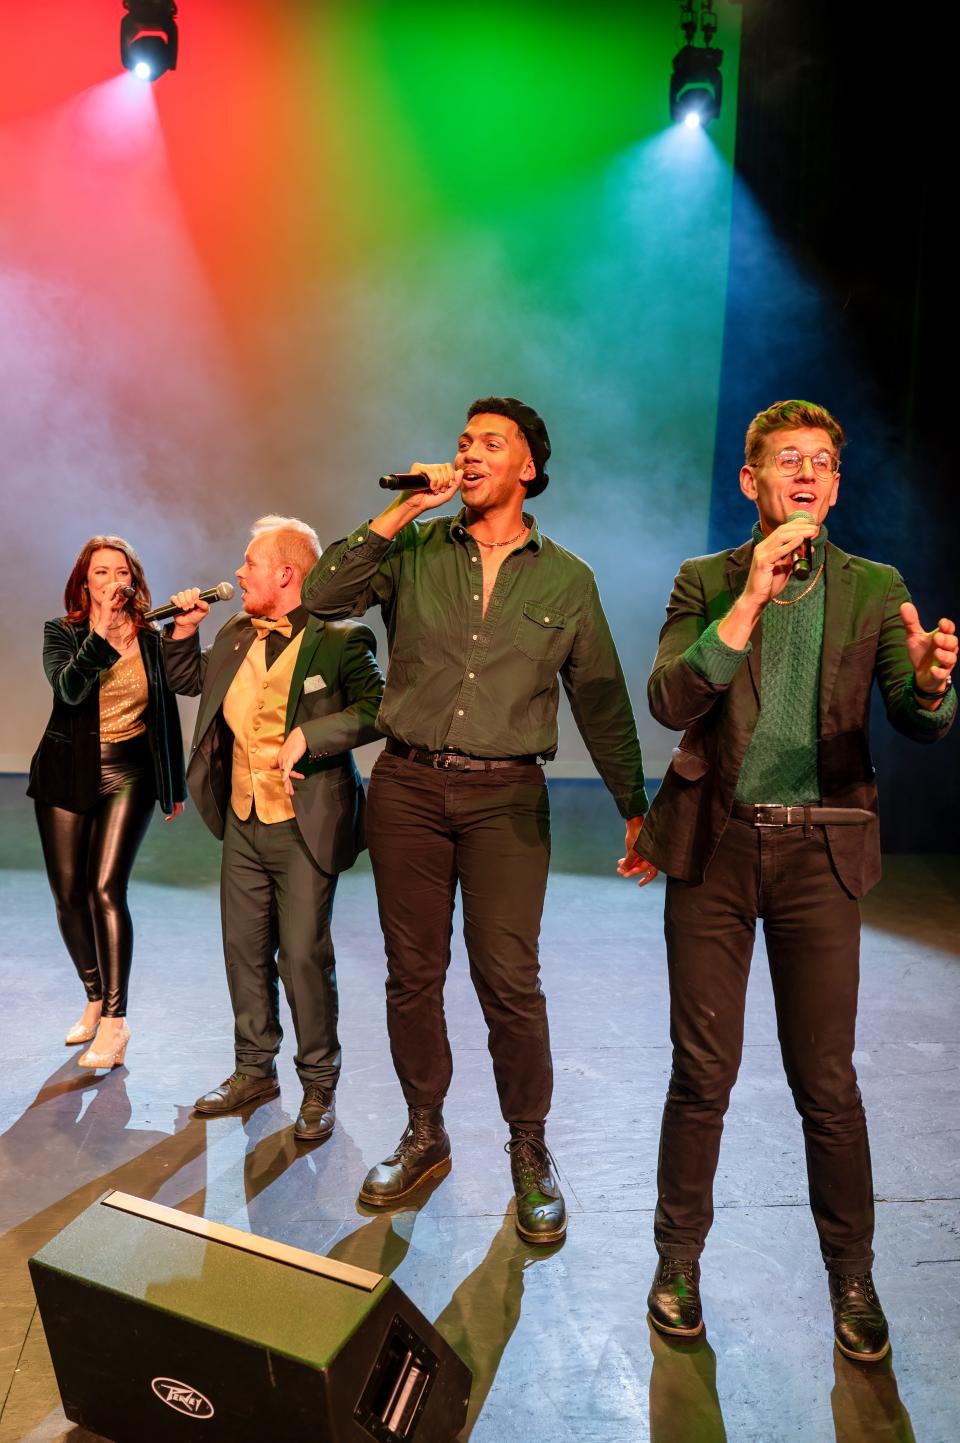 Vocal Fusion, a new a cappella singing group in Stark County shown rehearsing, will be presenting the "All I Want For Christmas" show at 7 p.m. on Friday and Saturday at Canton Palace Theatre.